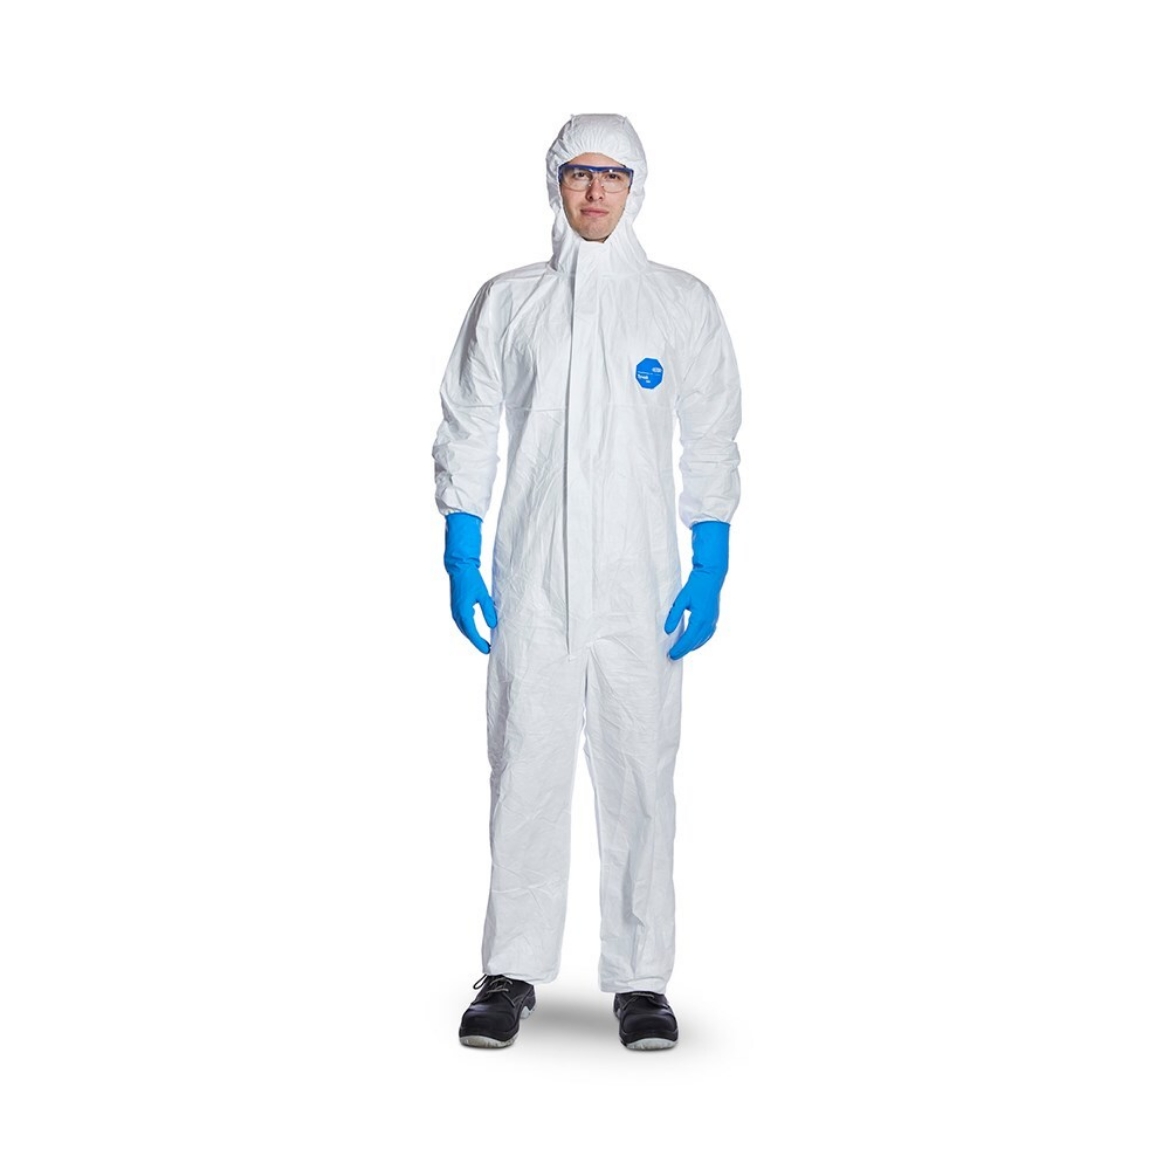 Picture of DuPont Tyvek 500 DuPont Tyvek 500 Disposable Coveralls White Size 2XL Disposable Coveralls White Size 2XL